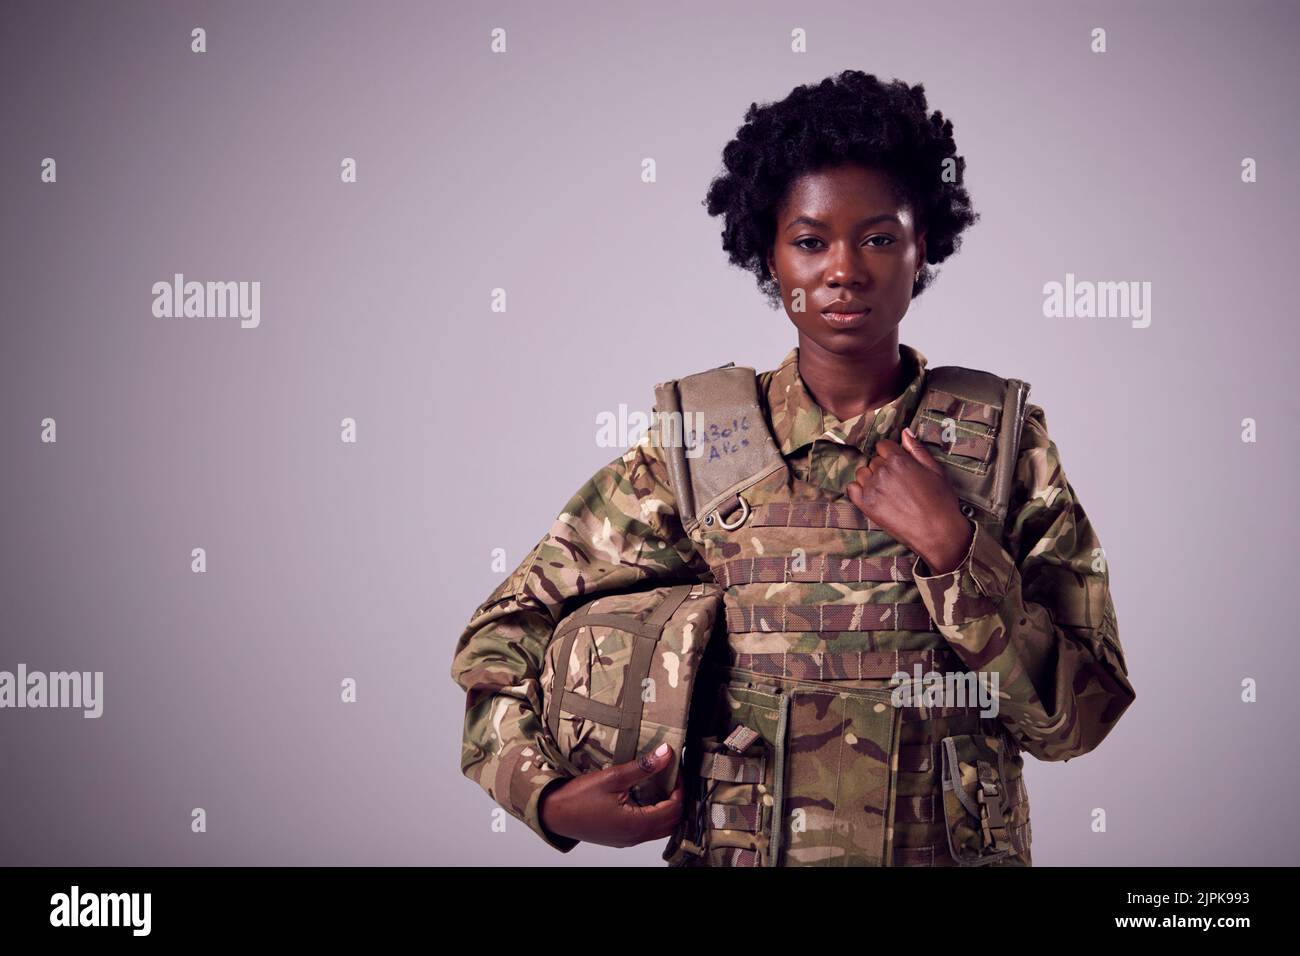 serious, military, soldier, army, person of color, berufsporträt, militaries, troops, soldiers, armies Stock Photo